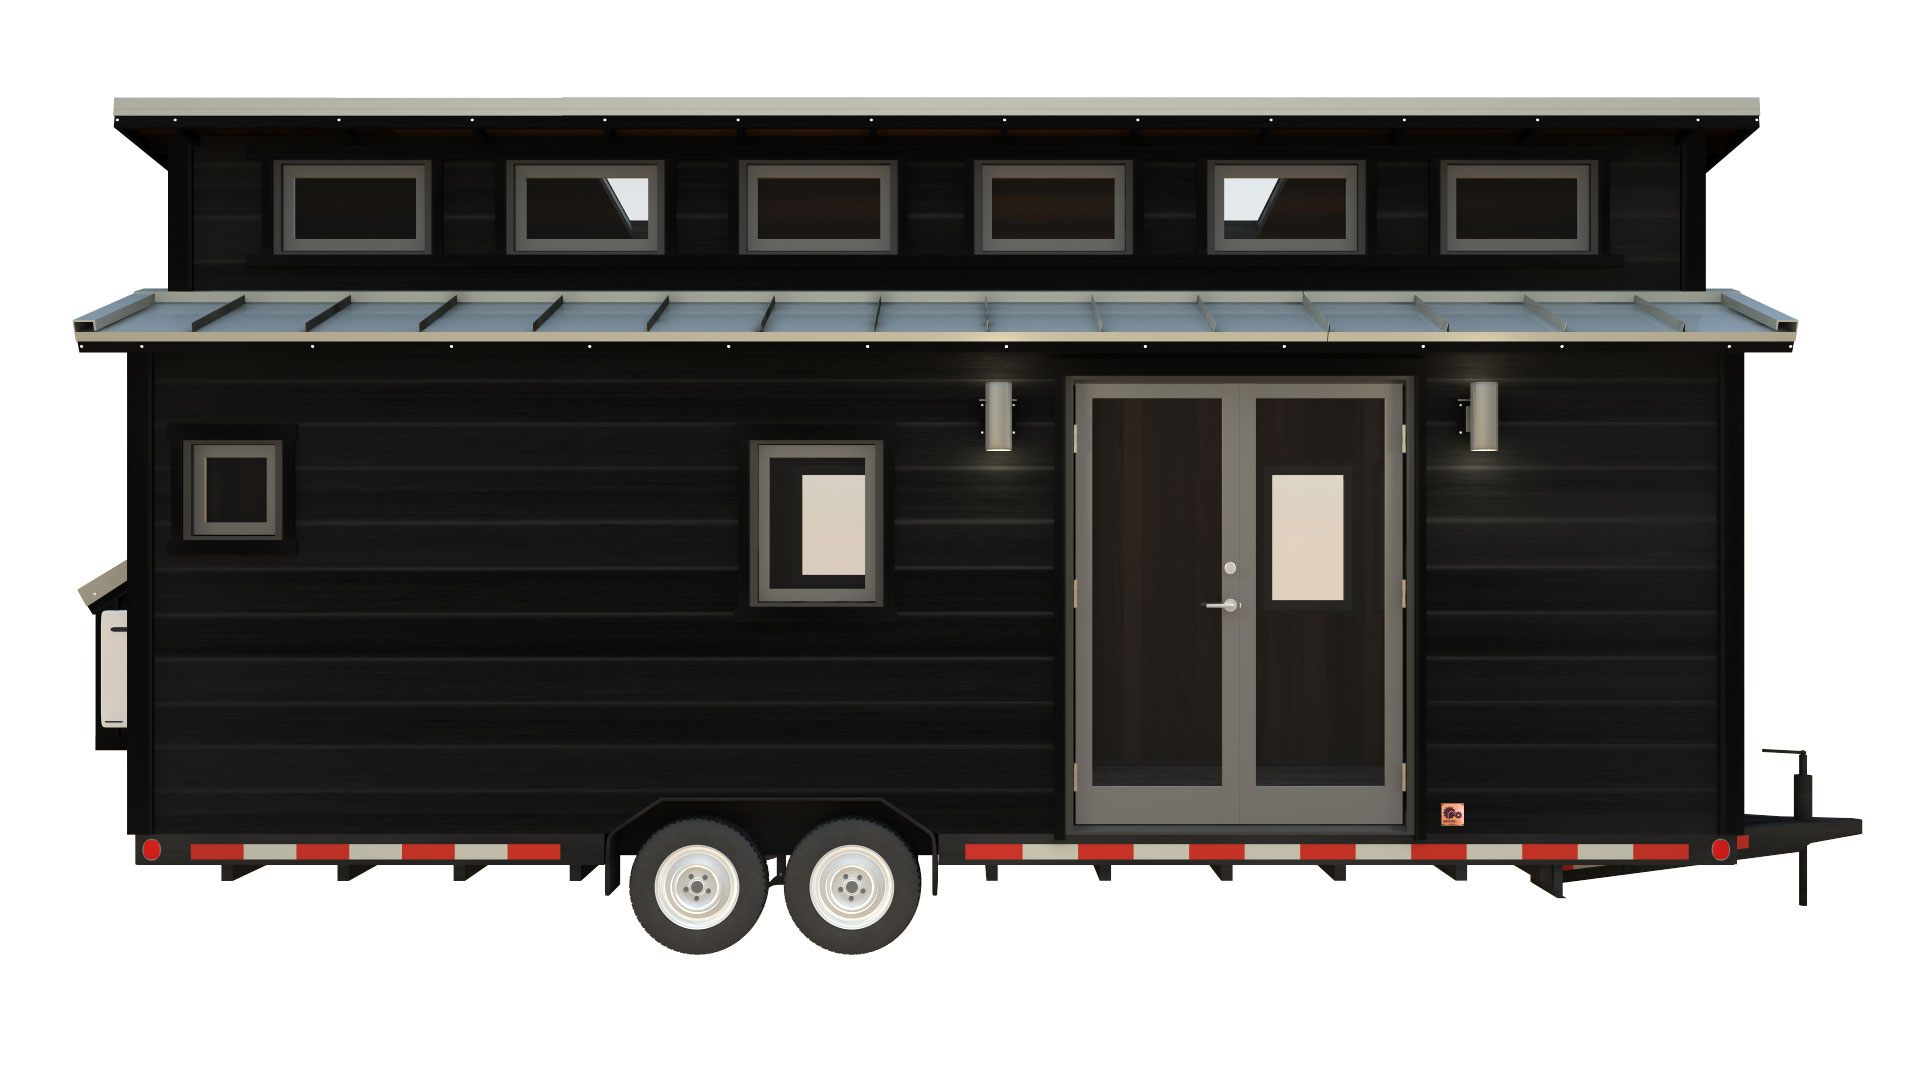 The Cider Box Modern Tiny  House  Plans  for Your Home  on Wheels